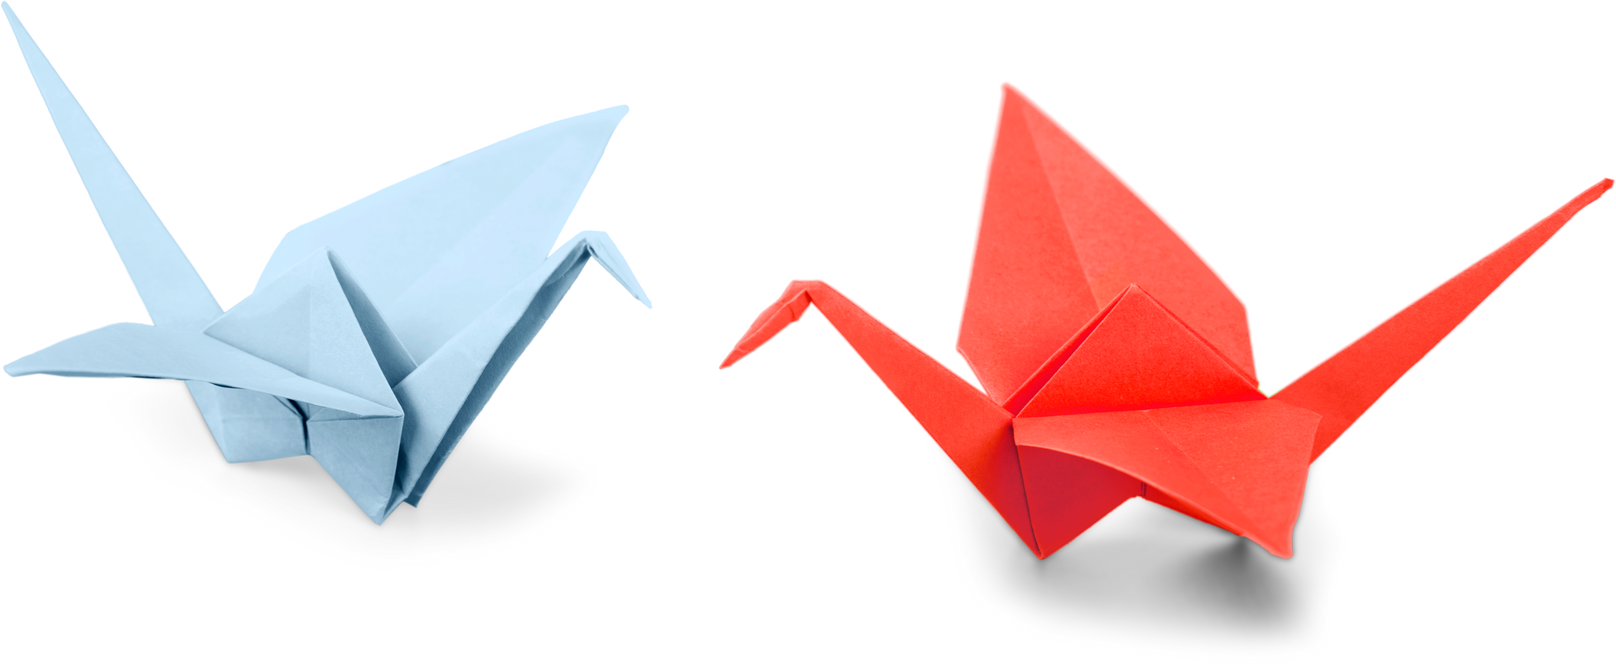 Paper Cranes Origami Isolated